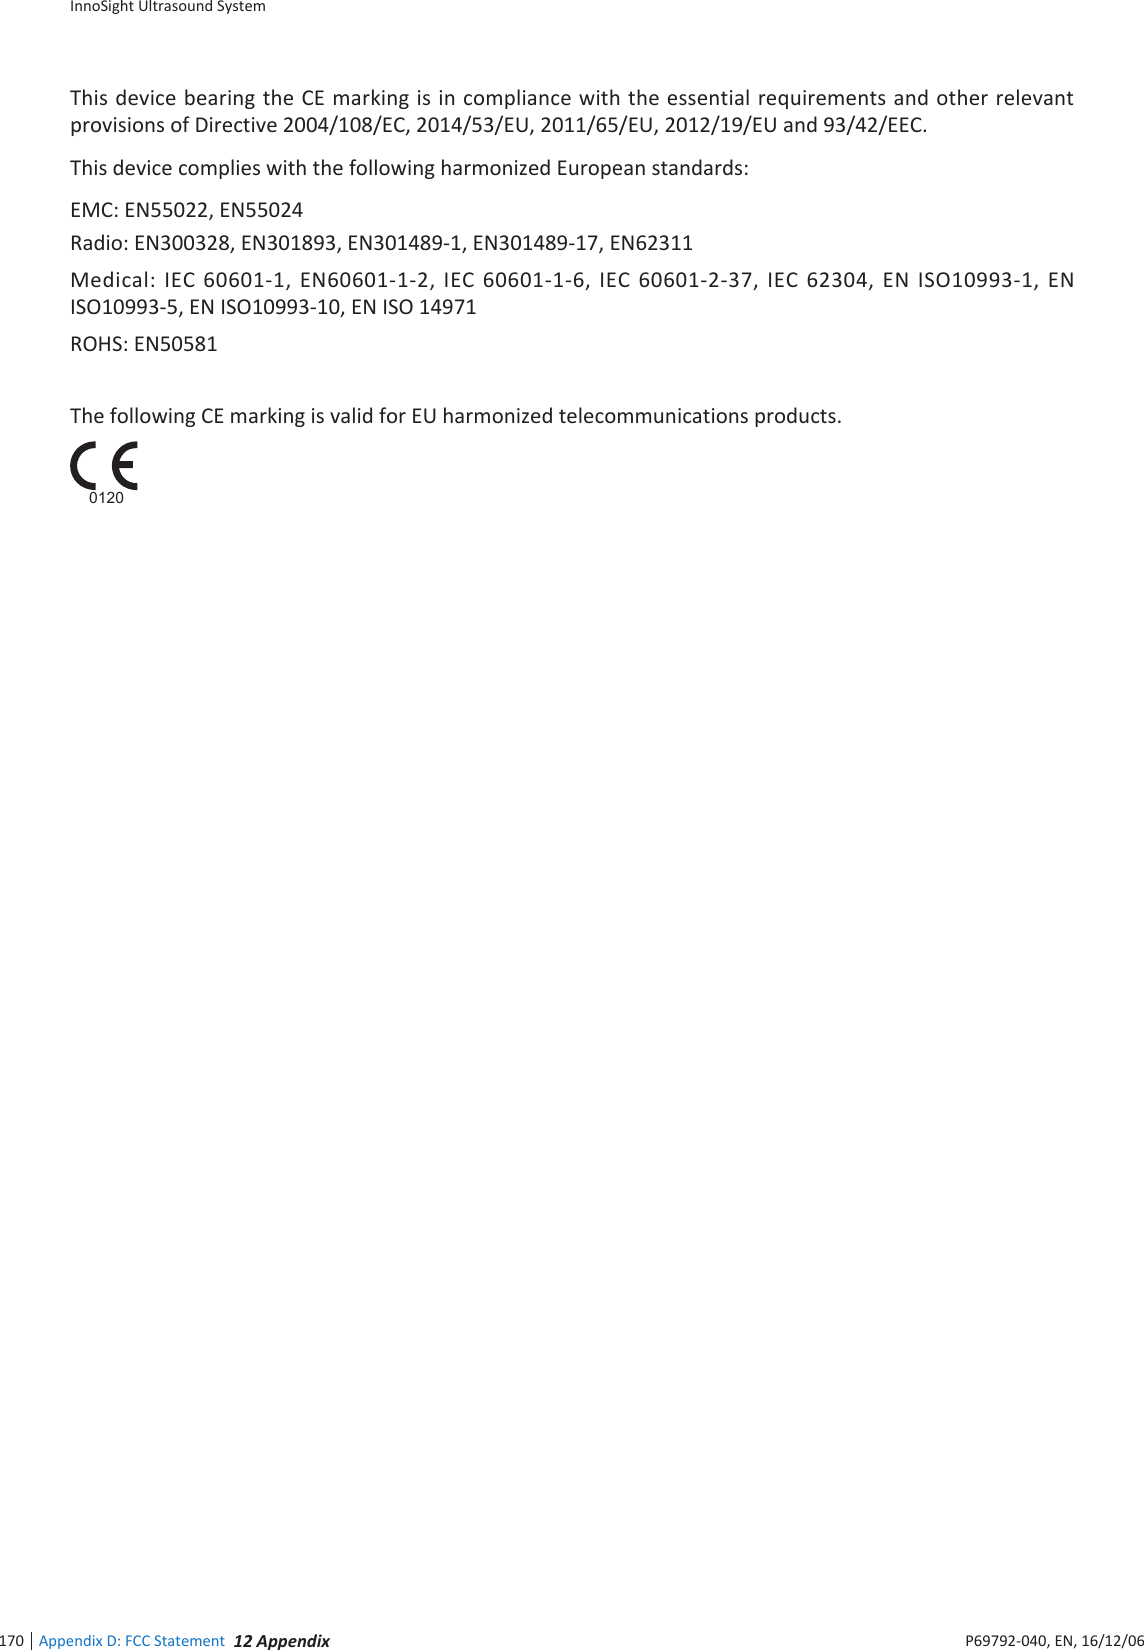 InnoSight Ultrasound SystemAppendix D: FCC Statement 12 Appendix170 P6992-4, EN, 16/12/6This device bearing the CE marking is in compliance with the essential requirements and other relevant provisions of Directive 24/1/EC, 214/3/EU, 211/6/EU, 212/19/EU and 93/42/EECThis device complies with the following harmonized European standards:EMC: EN22, EN24Radio: EN332, EN3193, EN3149-1, EN3149-1, EN62311Medical: IEC 661-1, EN661-1-2, IEC 661-1-6, IEC 661-2-3, IEC 6234, EN ISO1993-1, EN ISO1993-, EN ISO1993-1, EN ISO 1491ROHS: EN1The following CE marking is valid for EU harmonized telecommunications products   0120